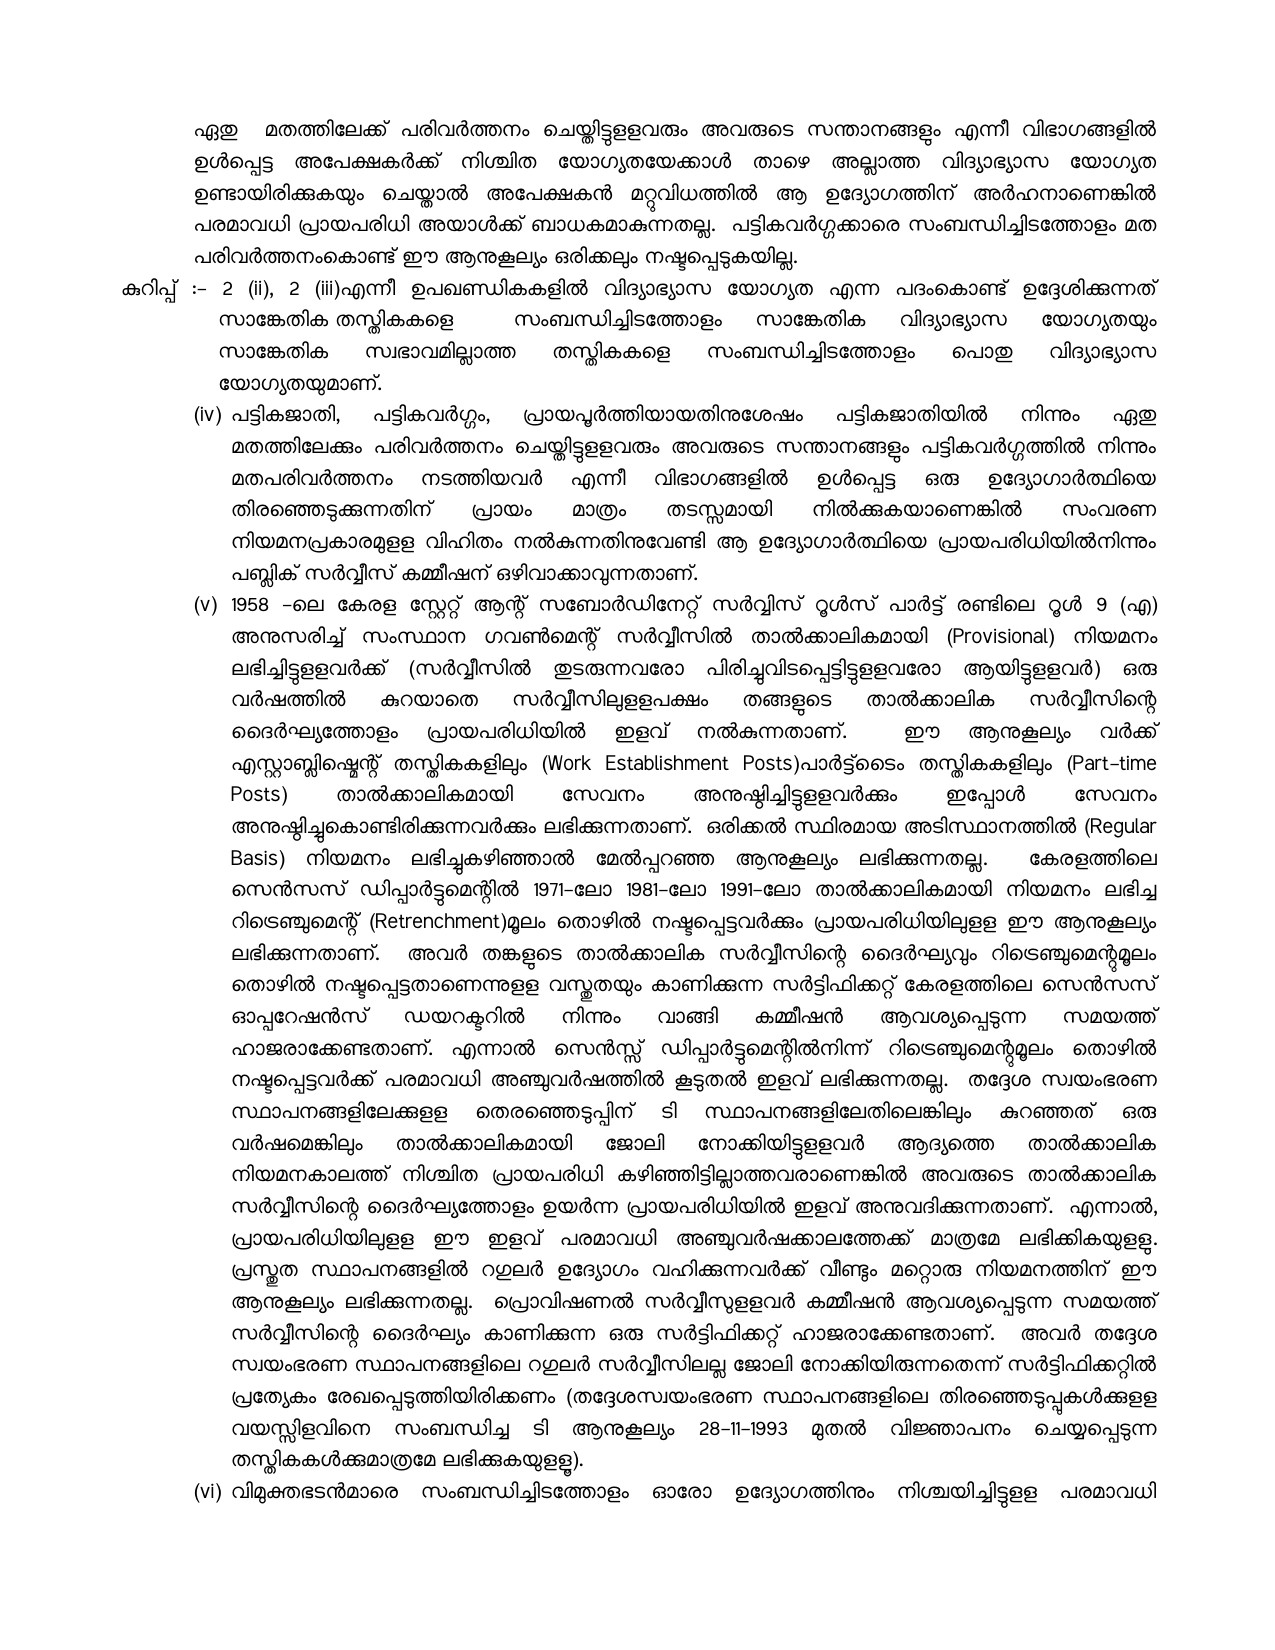 General Conditions and Certificate Formats in Malayalam - Notification Image 2